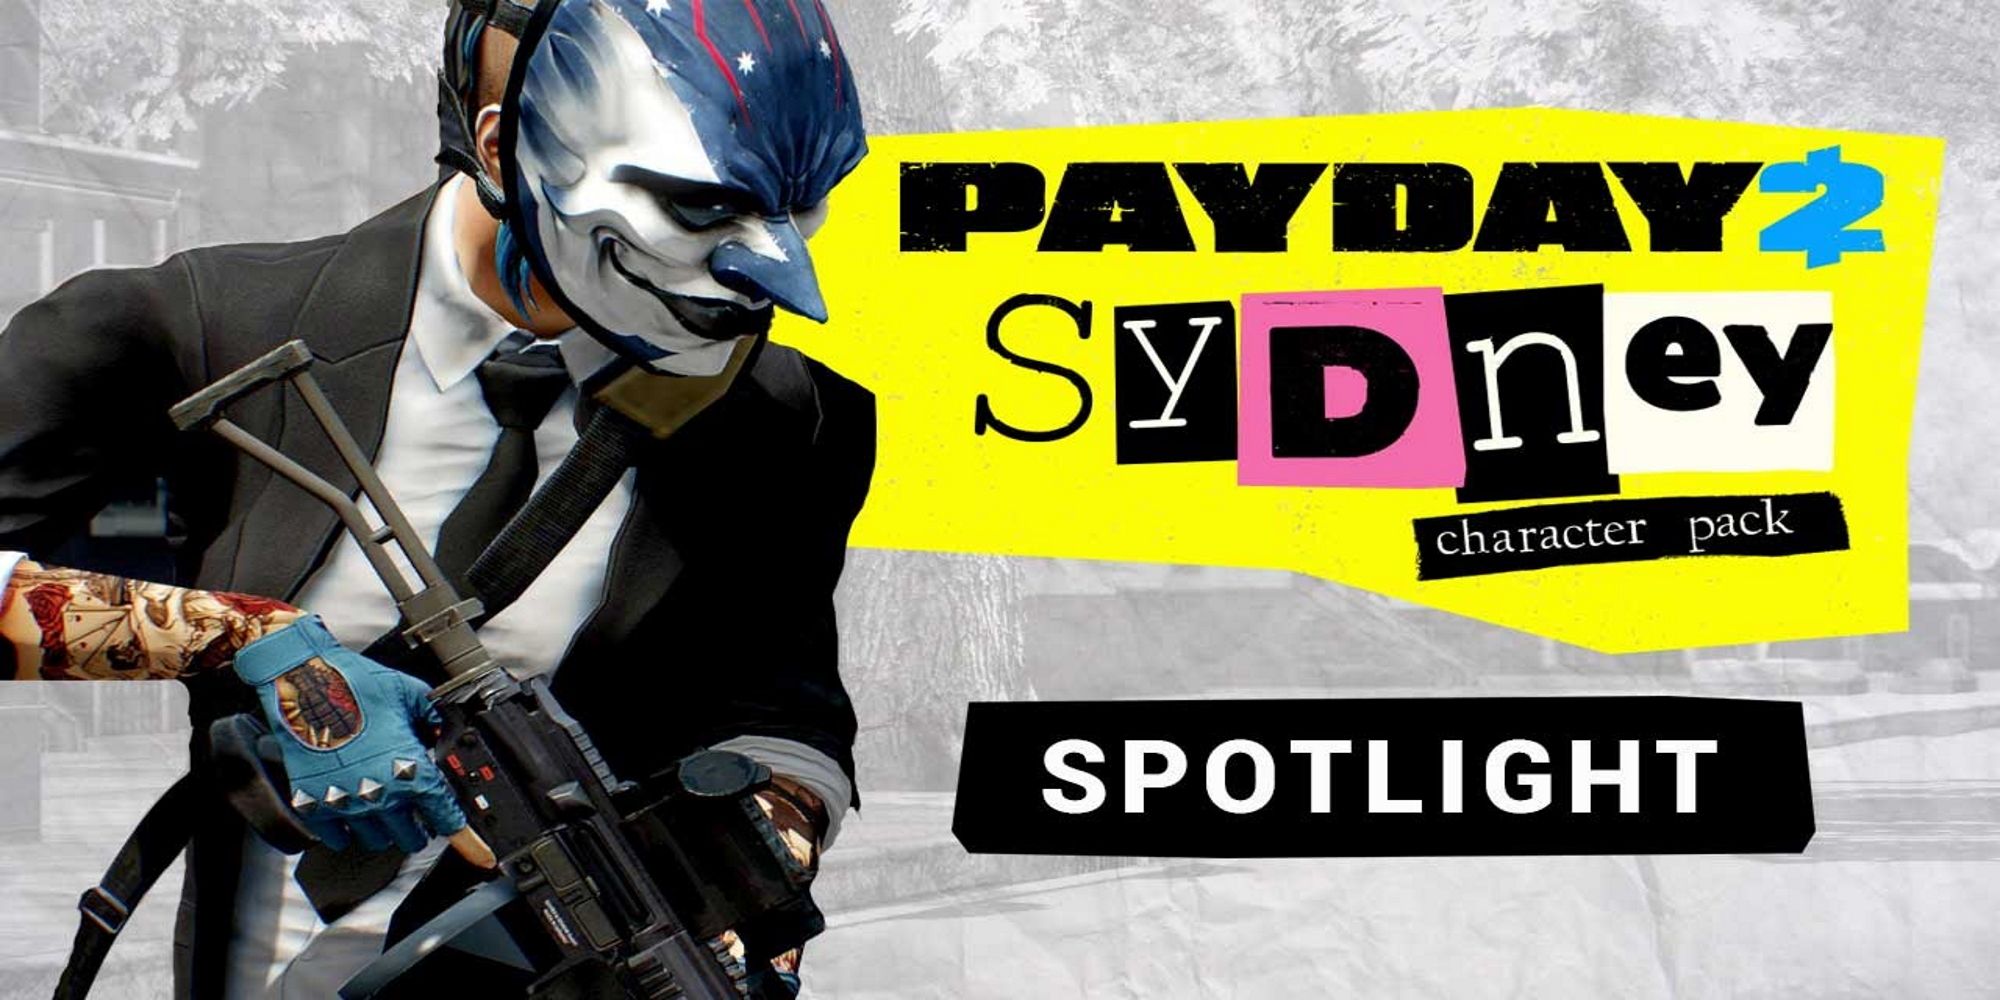 Sydney from PAYDAY 2